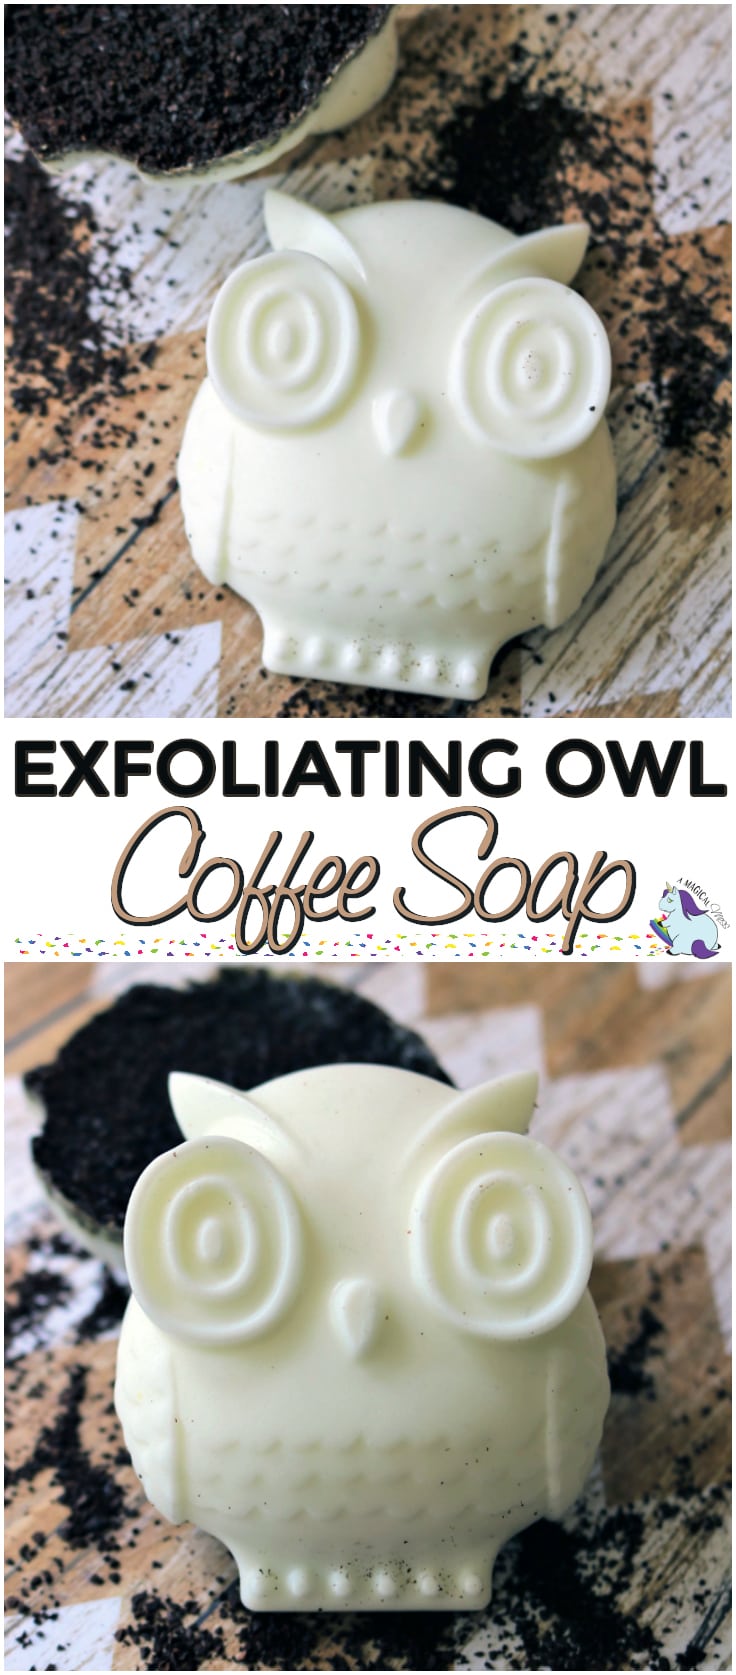 Exfoliating Coffee Soap Recipe with Cardamom and Lime